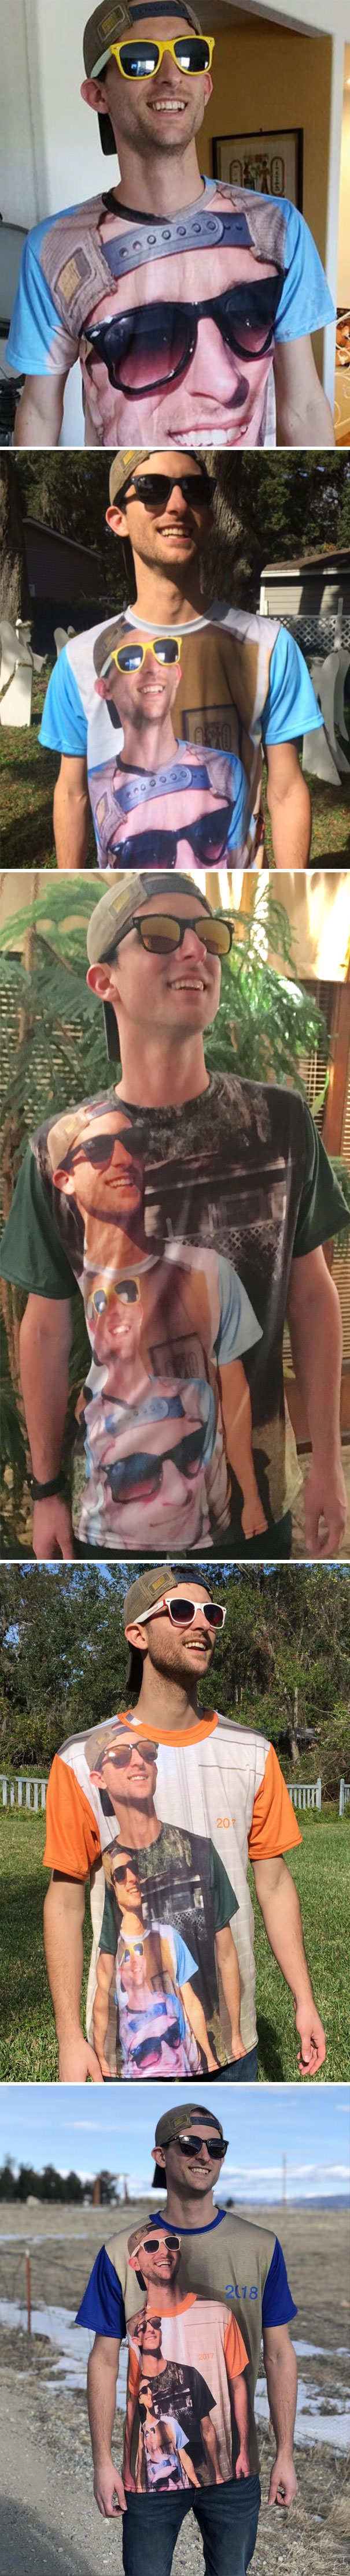 "Shirtception" - My Favorite Gift Every Year From My Brother. We're Now At Level 5